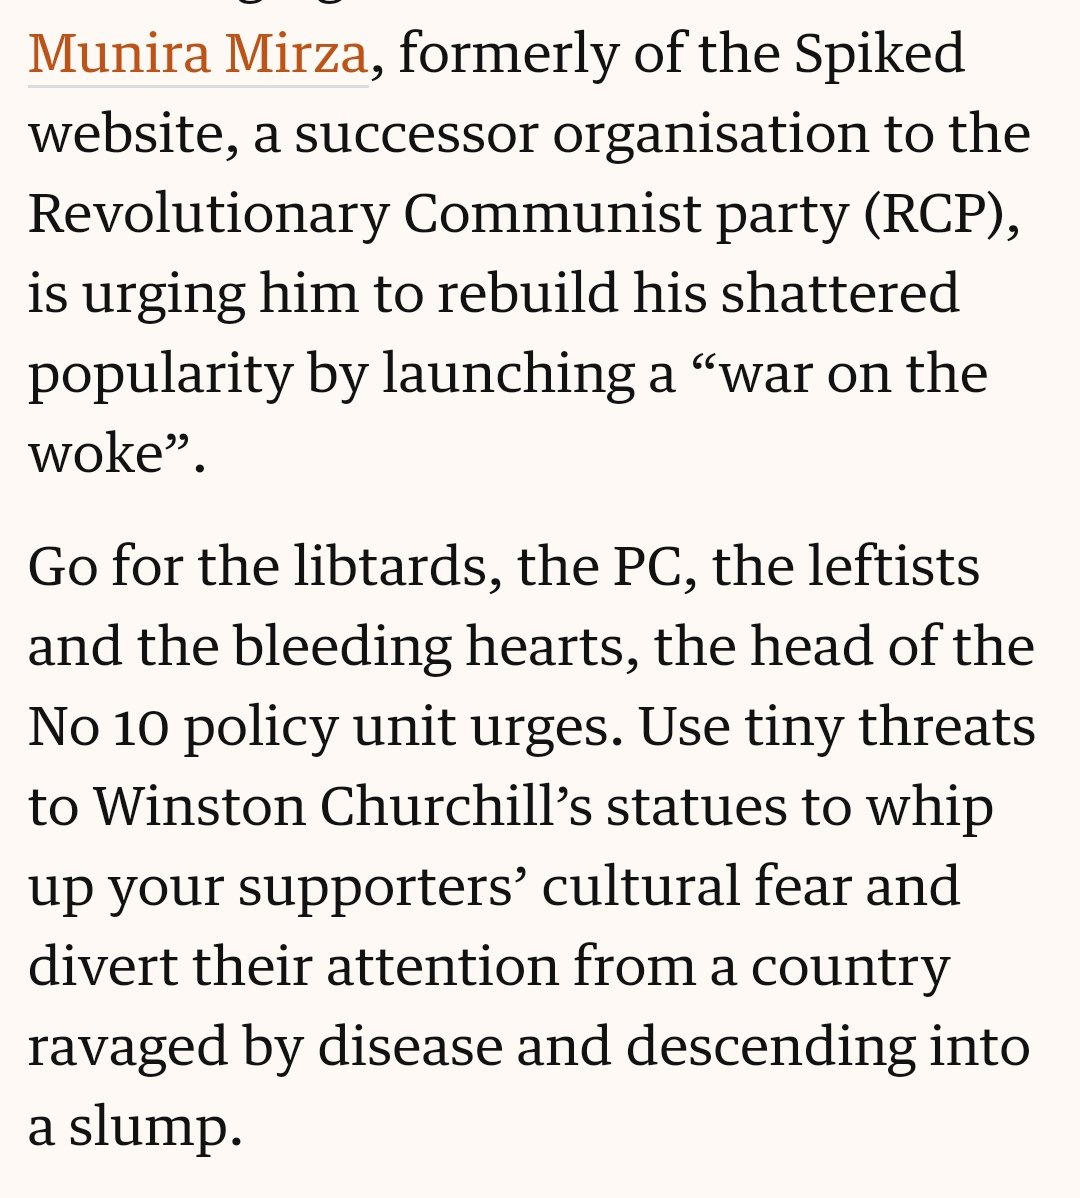 The modern right is closer to Bolshevism than to Burke ...  https://amp.theguardian.com/commentisfree/2020/jun/20/the-far-left-origins-of-no-10s-desperate-attack-on-all-things-woke-#click=https://t.co/MJ5GUxWU1g